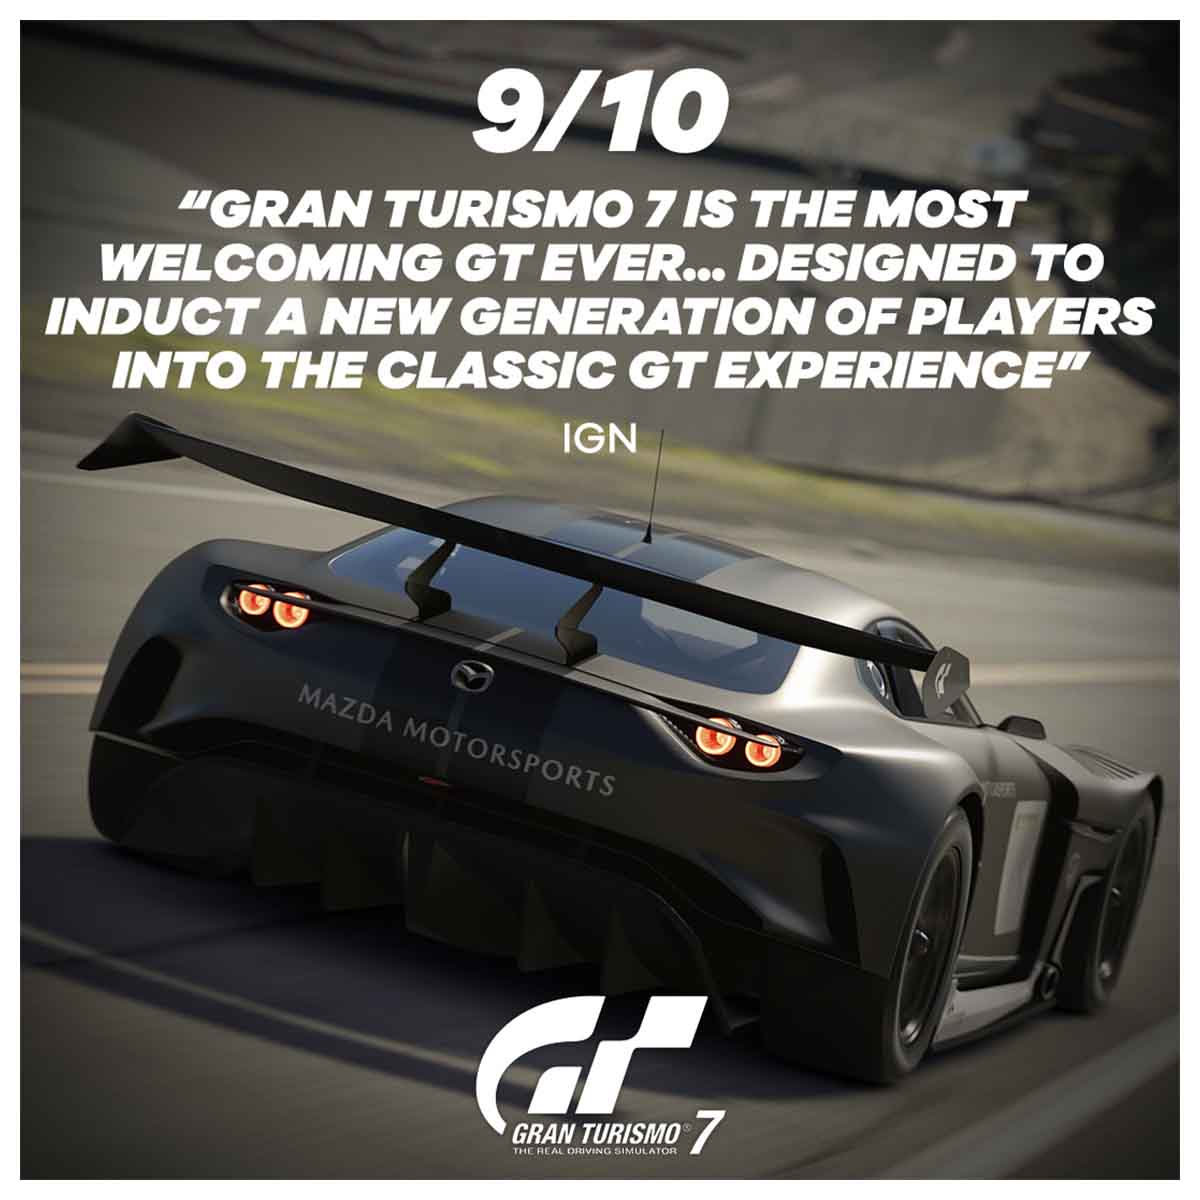 Gran Turismo 7 PS5 and PS4 deals: Best GT7 prices at ShopTo, Asda